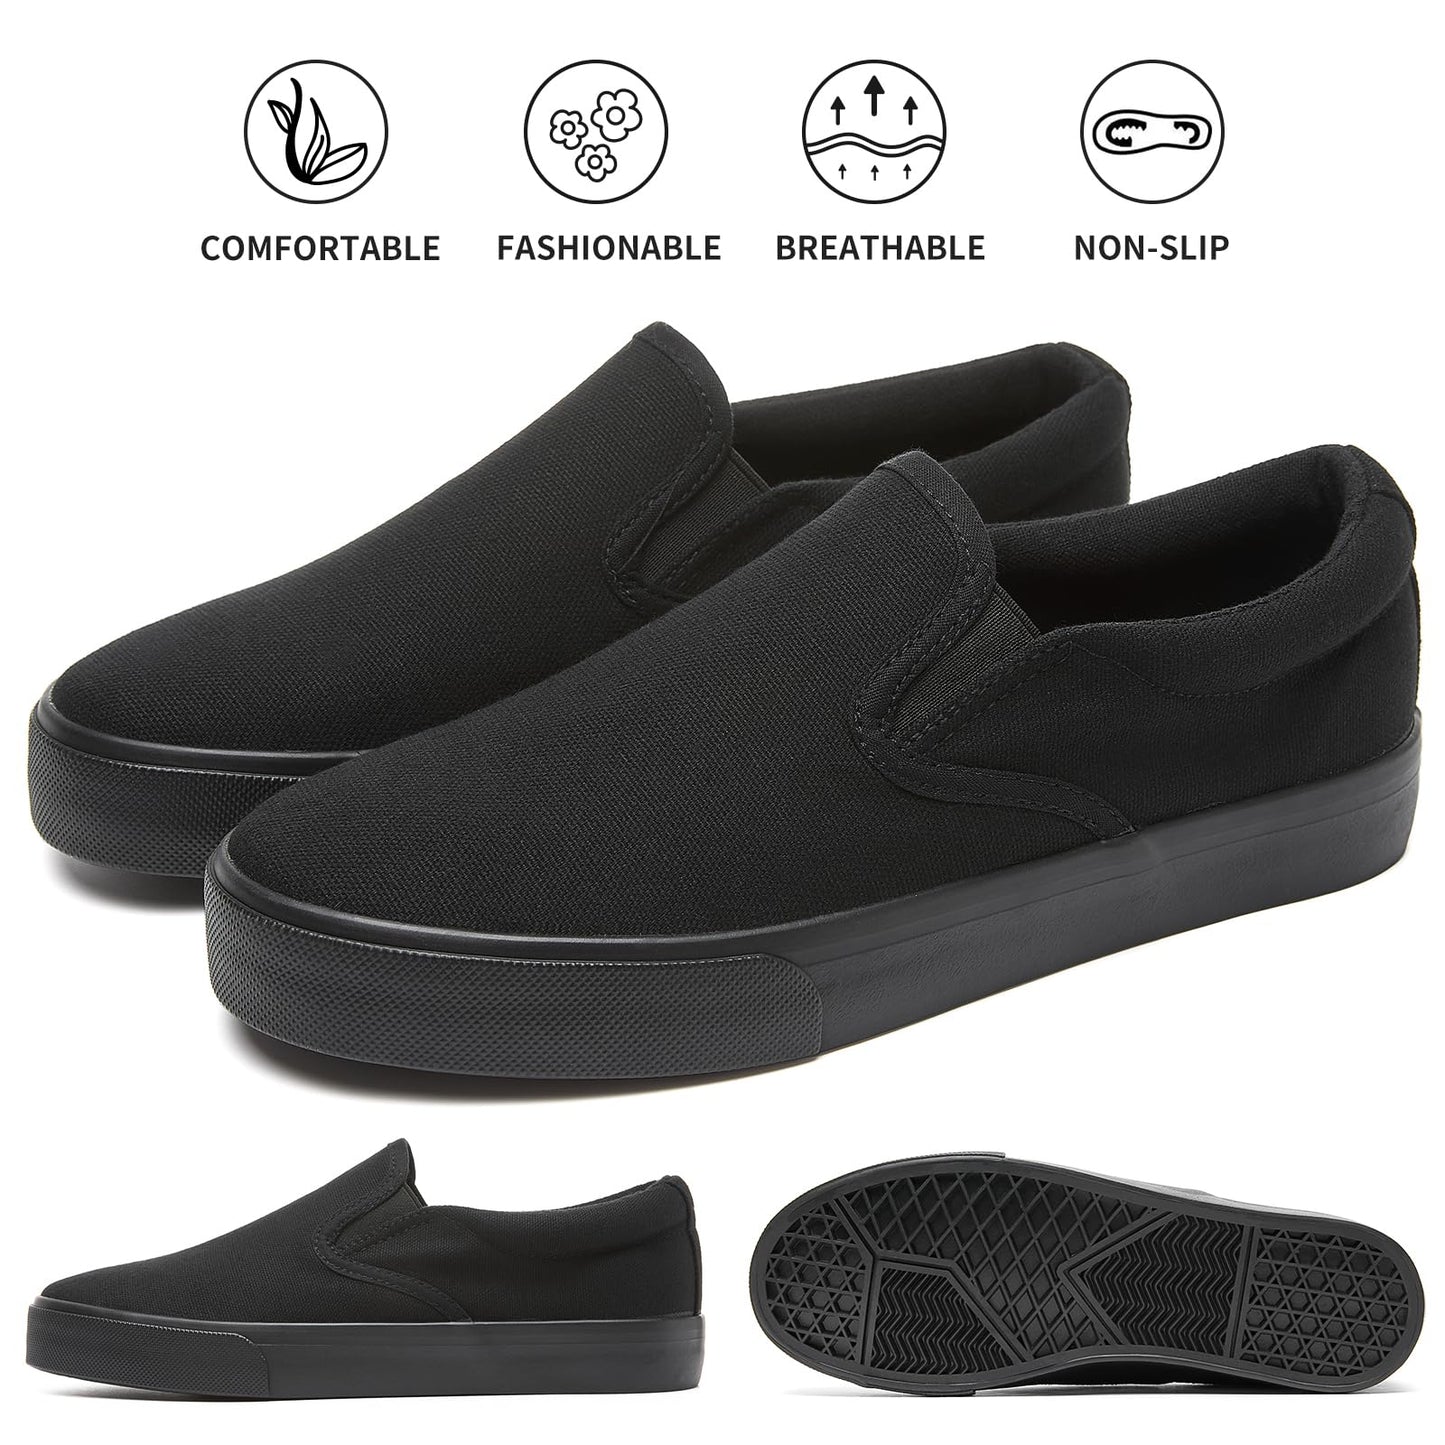 Women's Canvas Slip On Shoes Fashion Sneakers Flats Shoes White Canvas Shoes(Full Black.US8)